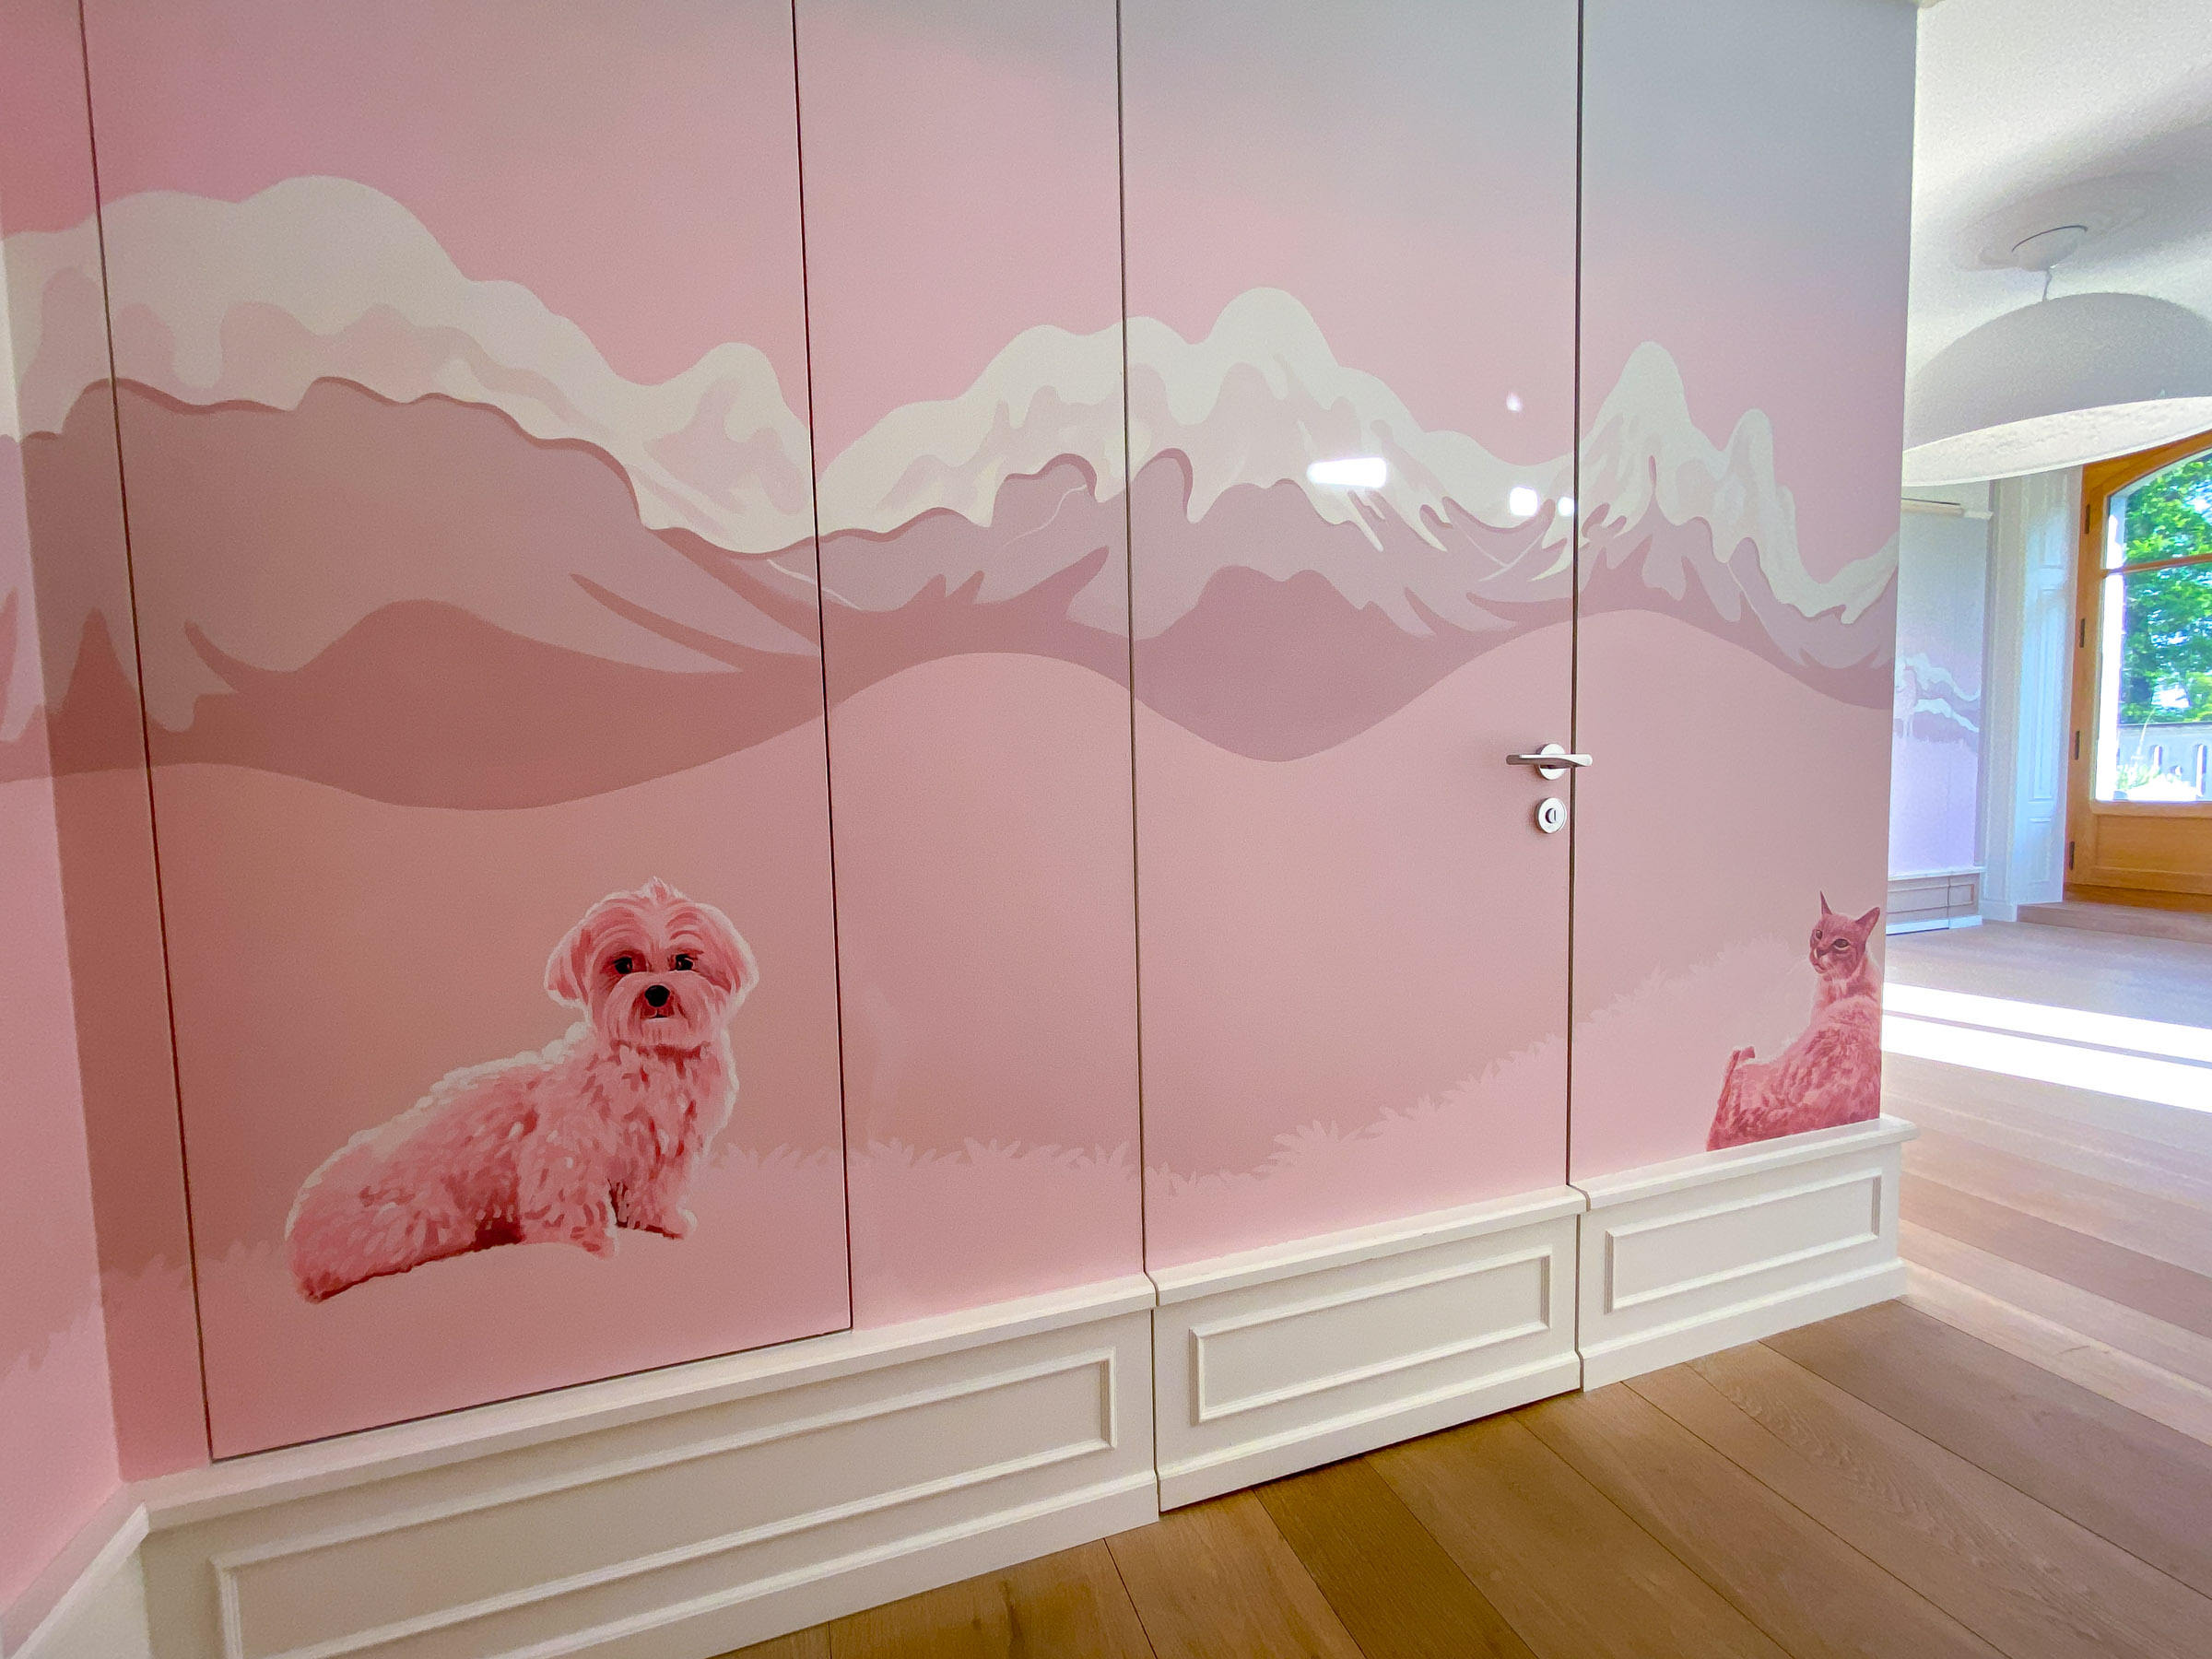 This part of the bedroom mural shows their very cute and fluffy dog, actually painted on a push lock cupboard door